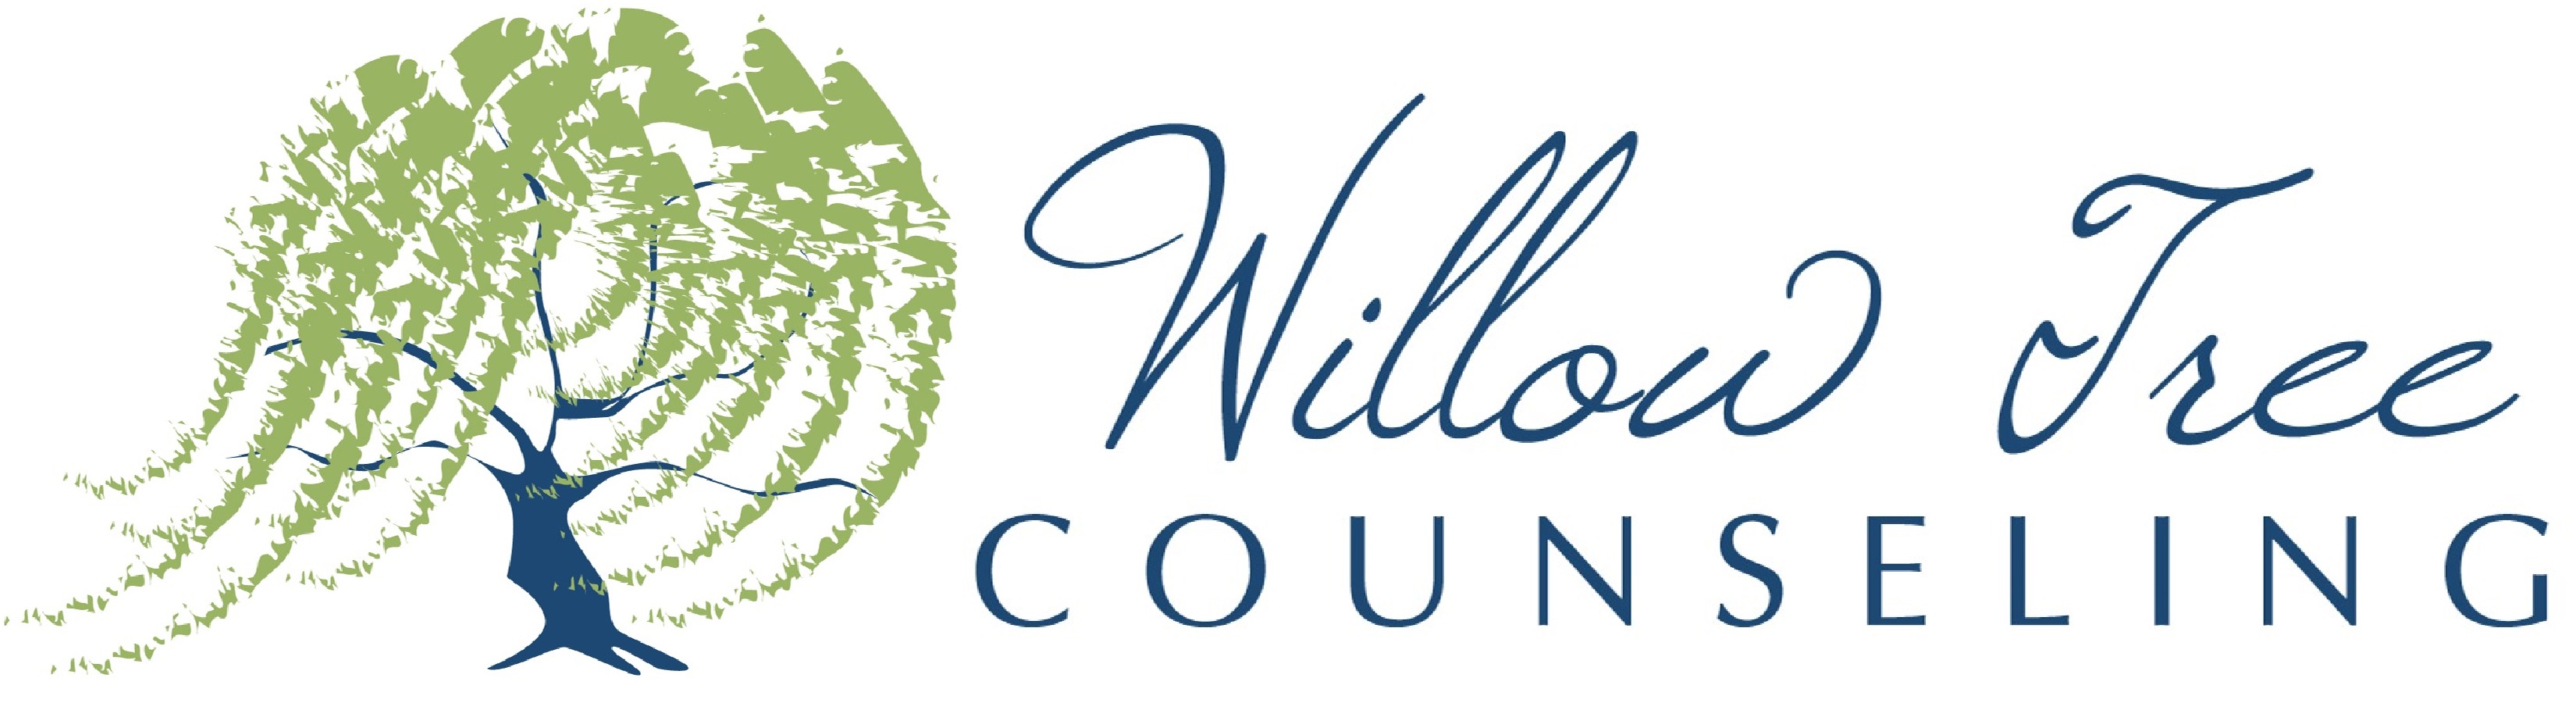 Homepage | Willow Tree Counseling